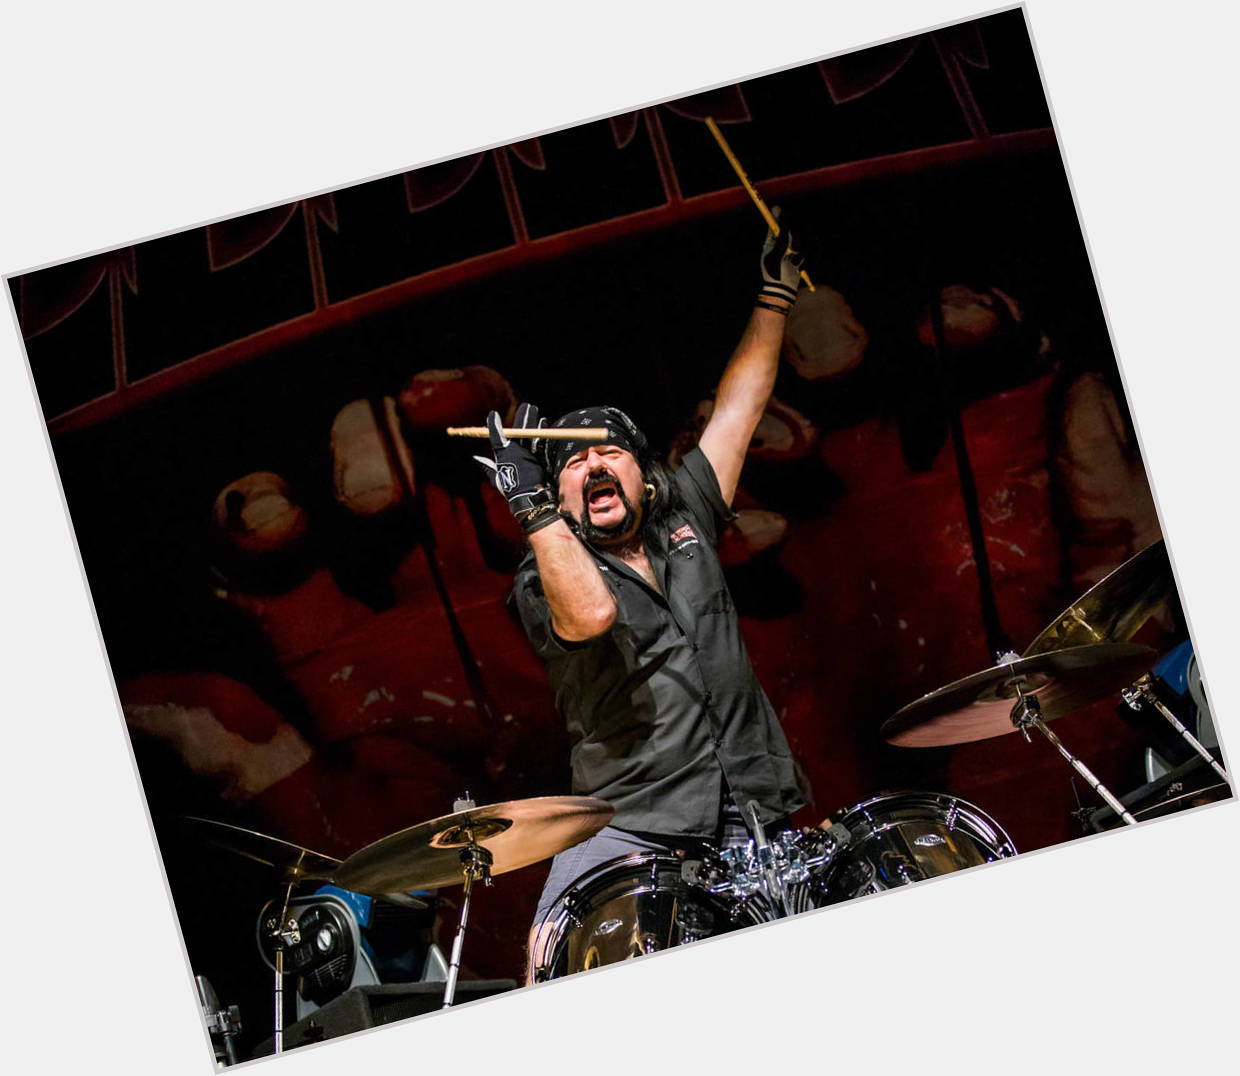 One of the greatest! The world misses you, Vinnie Paul. Happy Birthday. 